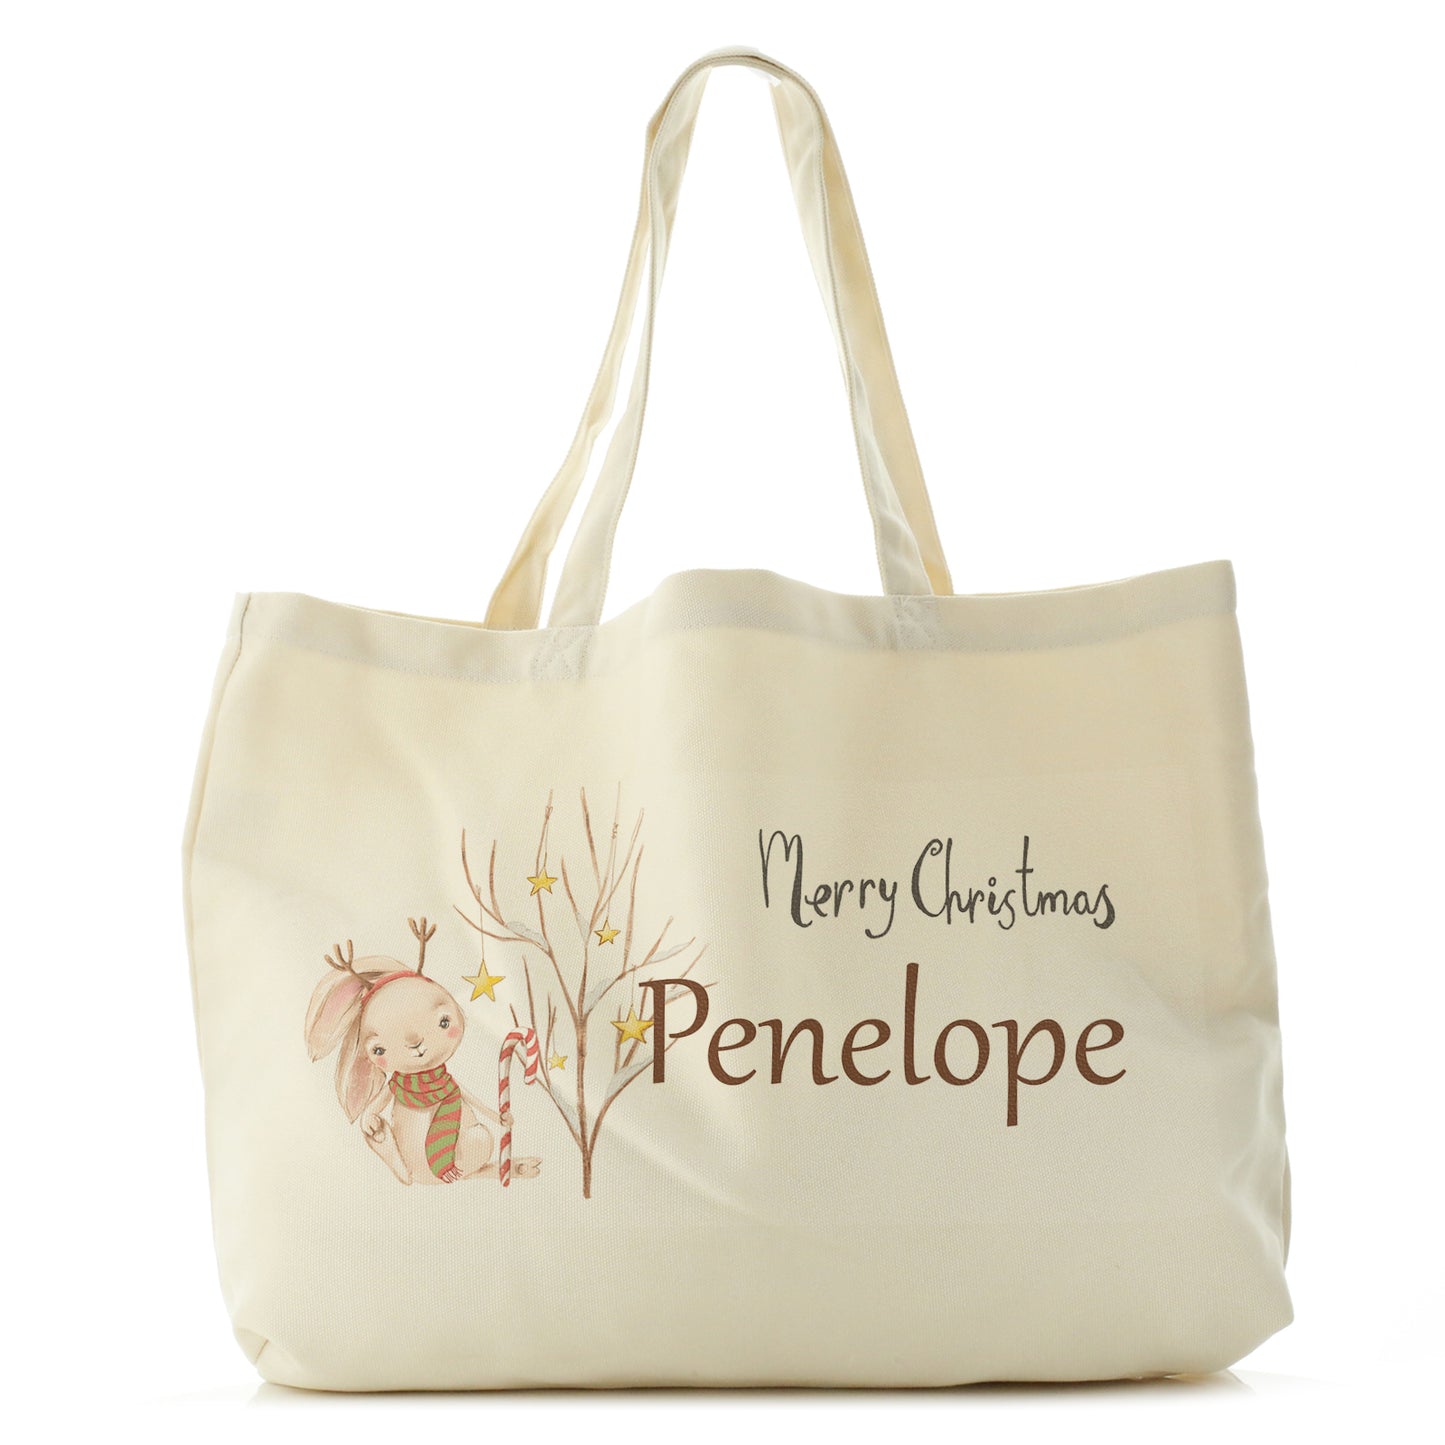 Personalised Canvas Tote Bag with Cute Text and Candy Cane Rabbit Star Tree